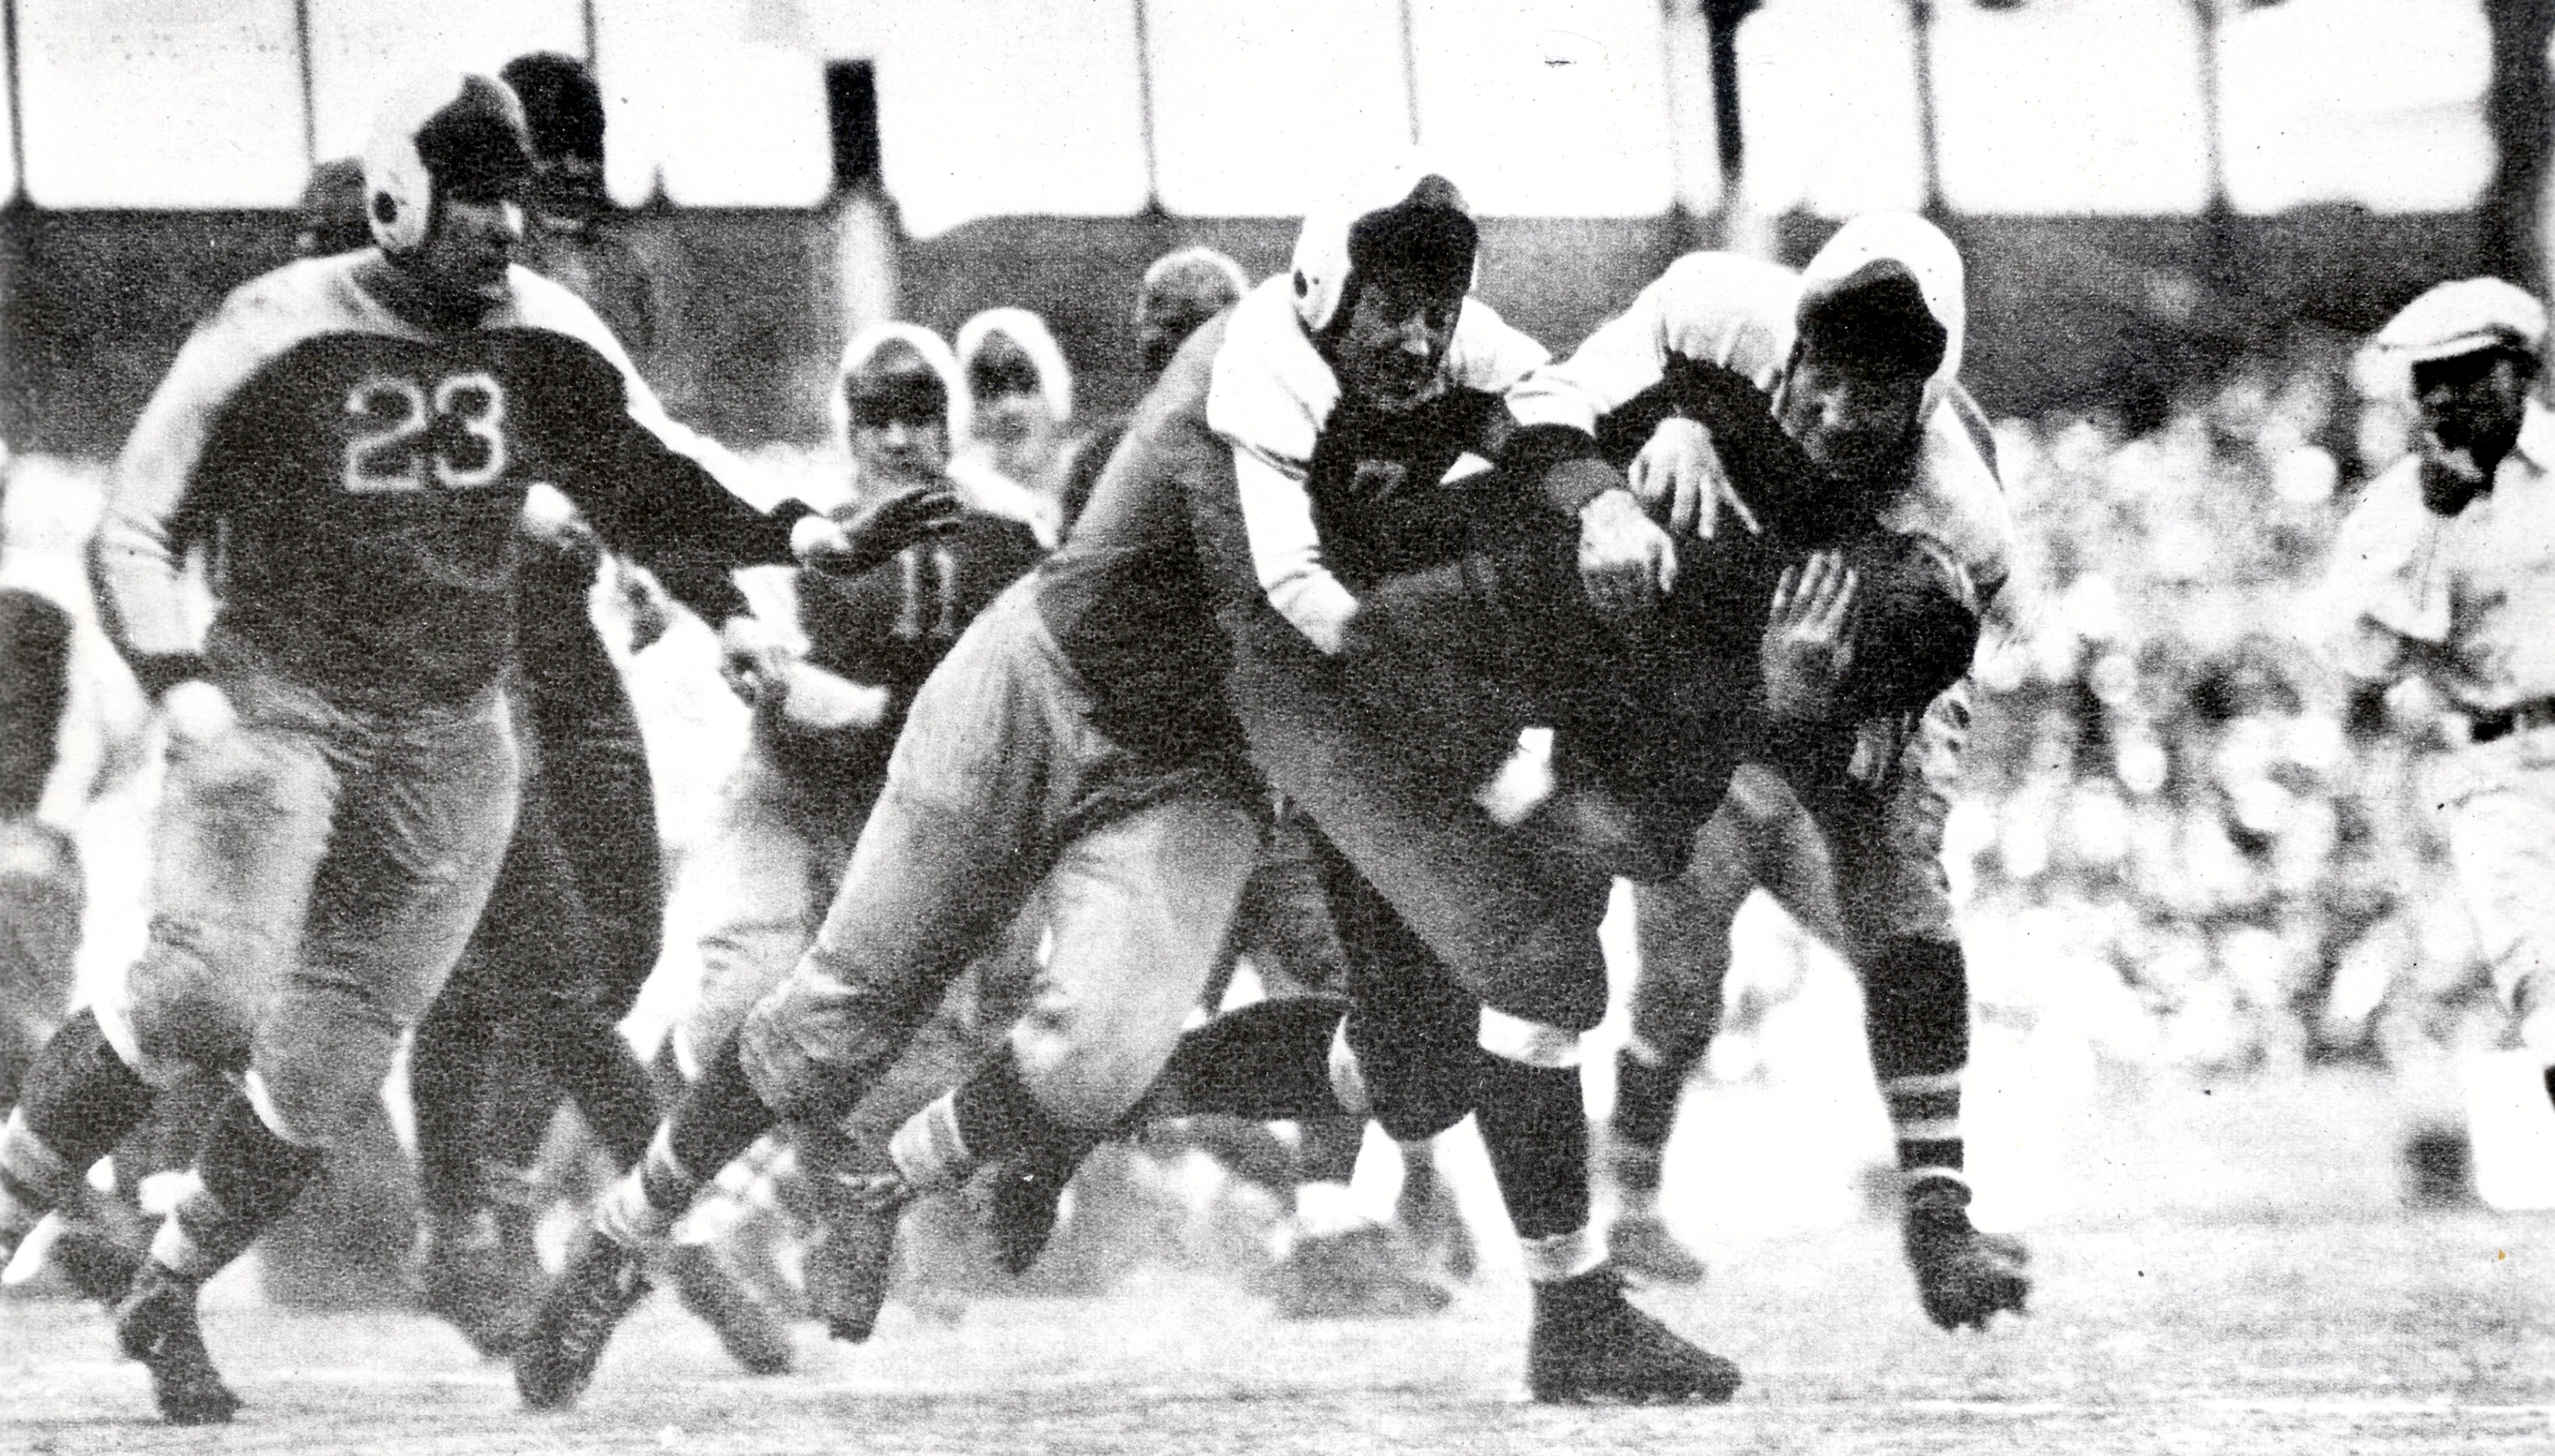 Chicago Bears fullback Bronko Nagurski is tackle by the New York Giants' Mel Hein in the 1934 NFL title game at the Polo Grounds in New York.